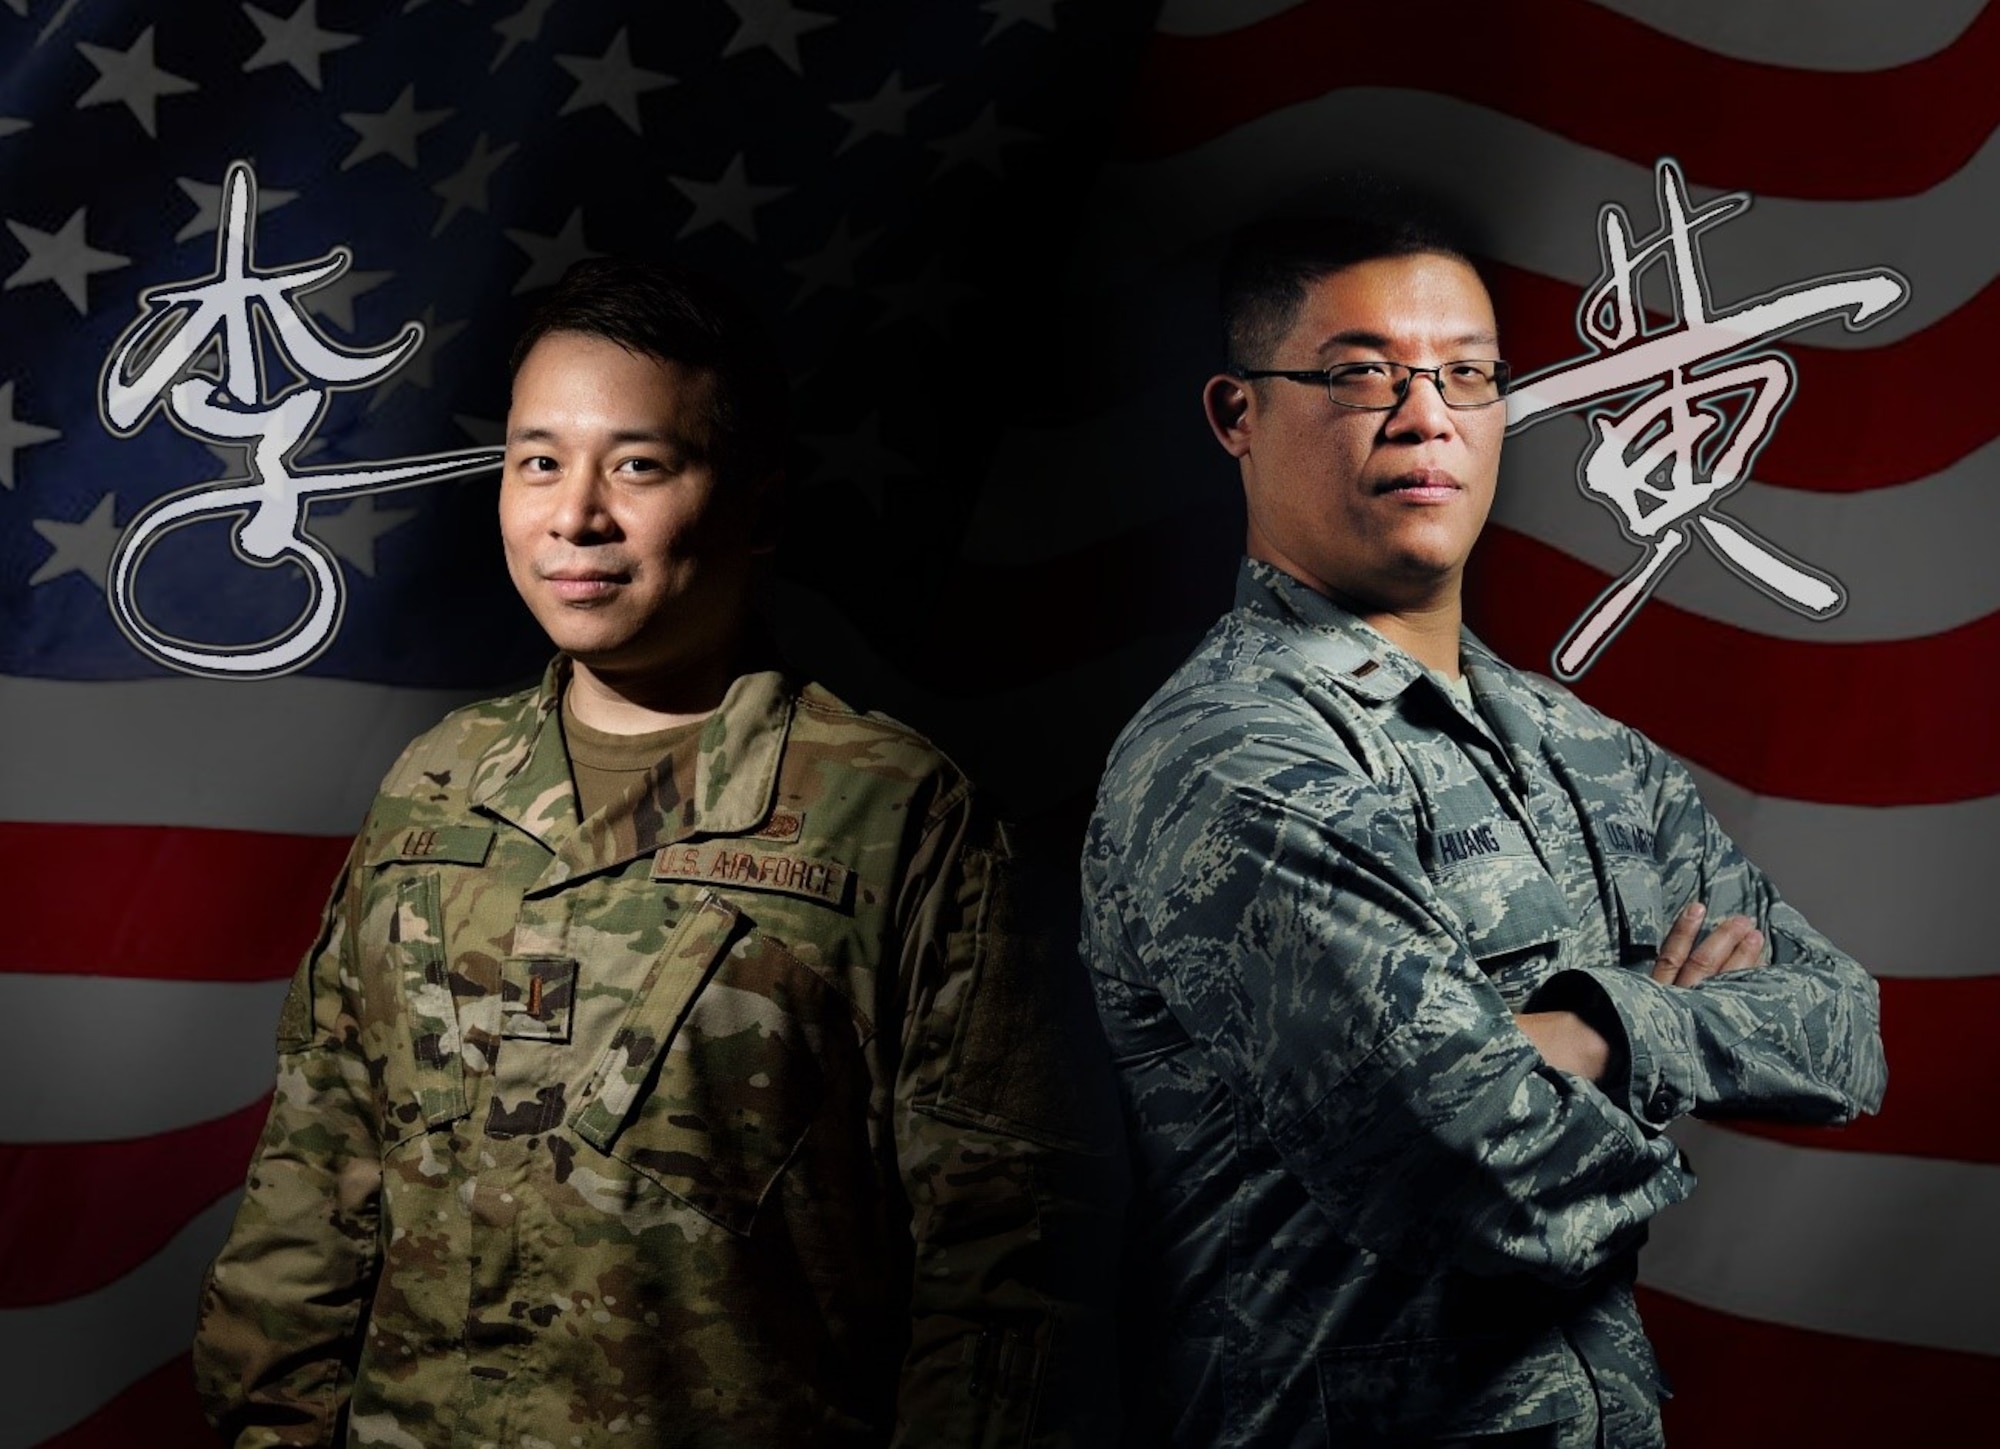 (from left to right) 2nd LTs Yuan-Xun Lee, Global Information Exploitation Squadron Open Skies project engineer and Derek Huang, Signal Analysis Squadron member, are positioned in front of an American flag with their names written in Chinese in their handwriting next to them. Both Huang and Lee are Chinese Americans serving at the National Air and Space Intelligence Center, Wright-Patterson AFB, Ohio. (U.S. Air Force graphic/Staff Sgt. Seth Stang)